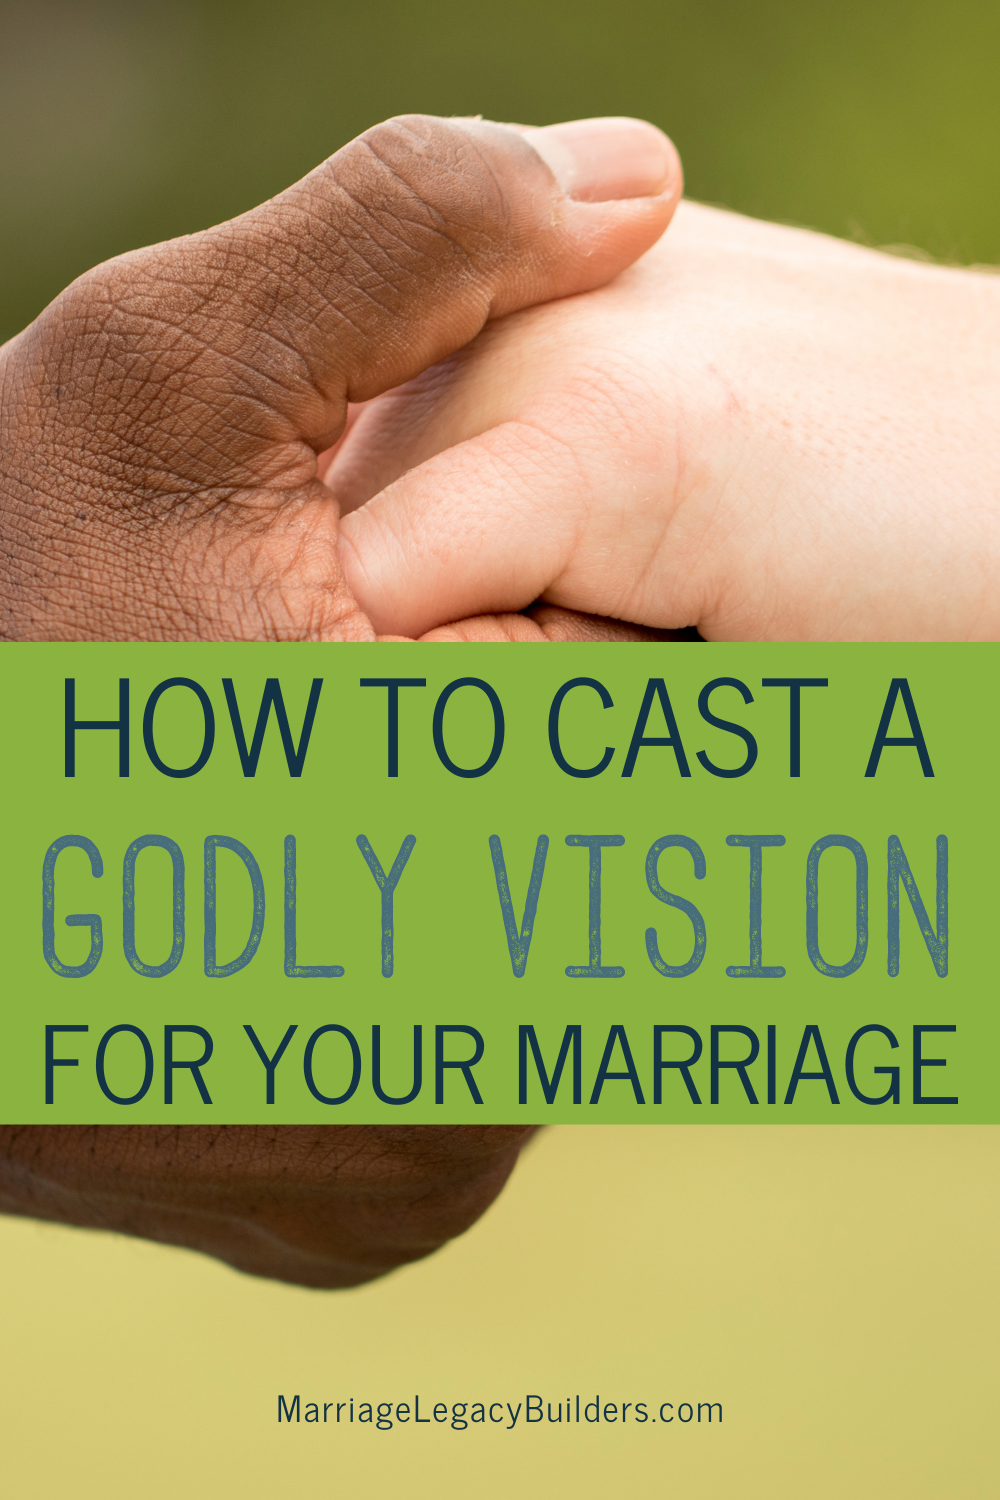 How to Cast a Godly Vision for Your Marriage